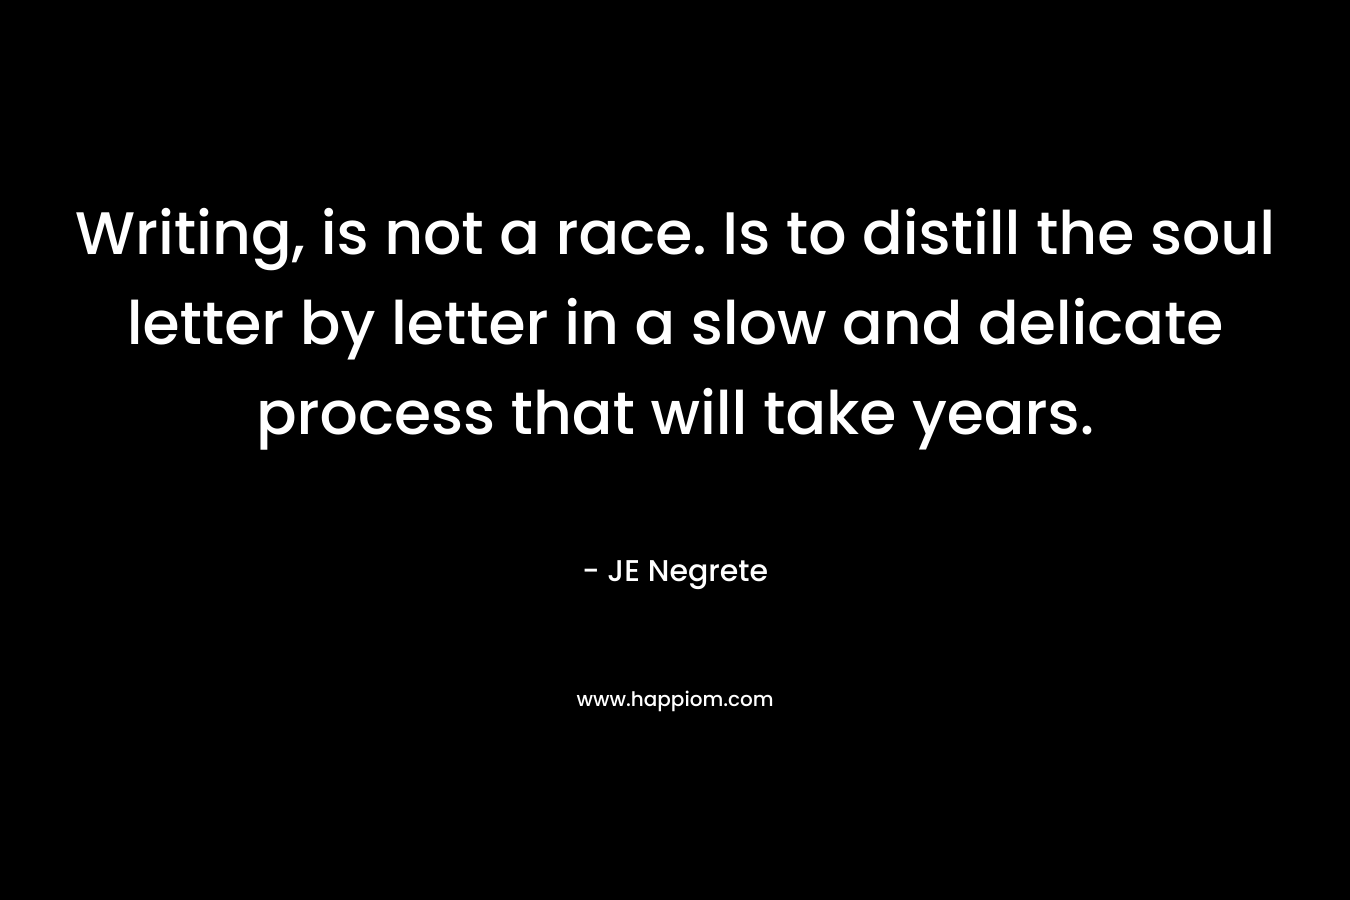 Writing, is not a race. Is to distill the soul letter by letter in a slow and delicate process that will take years. – JE Negrete